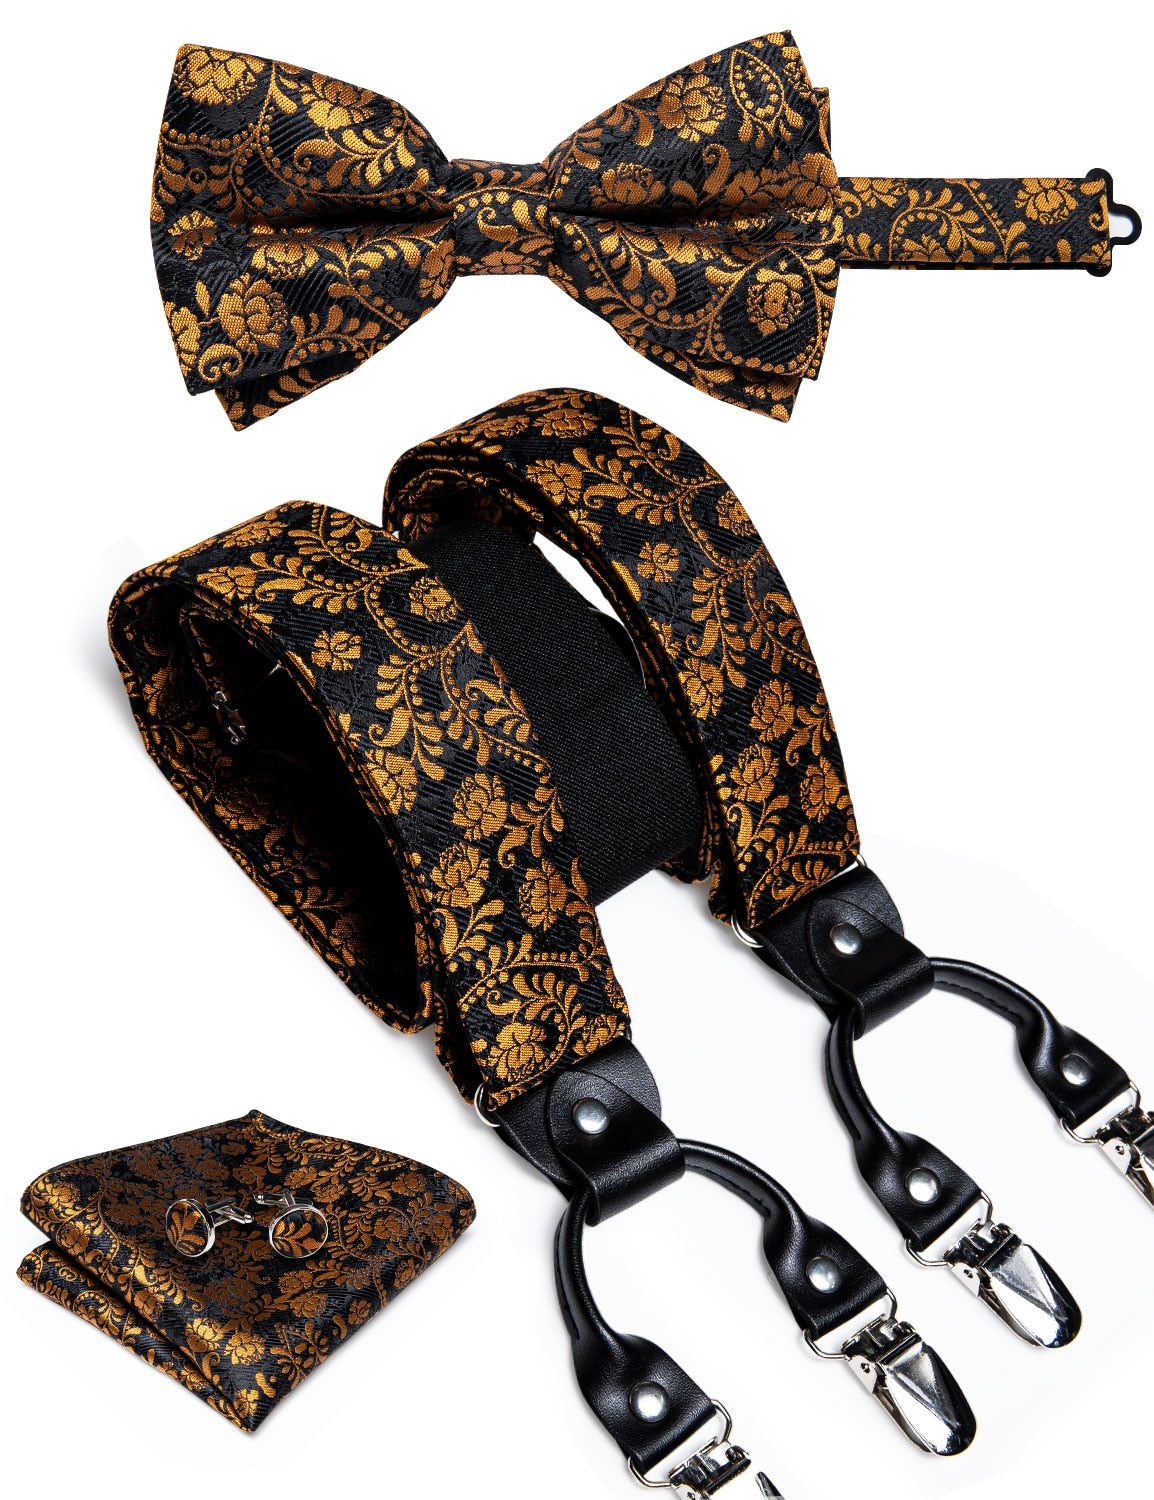 Leather 6 Clips Suspenders